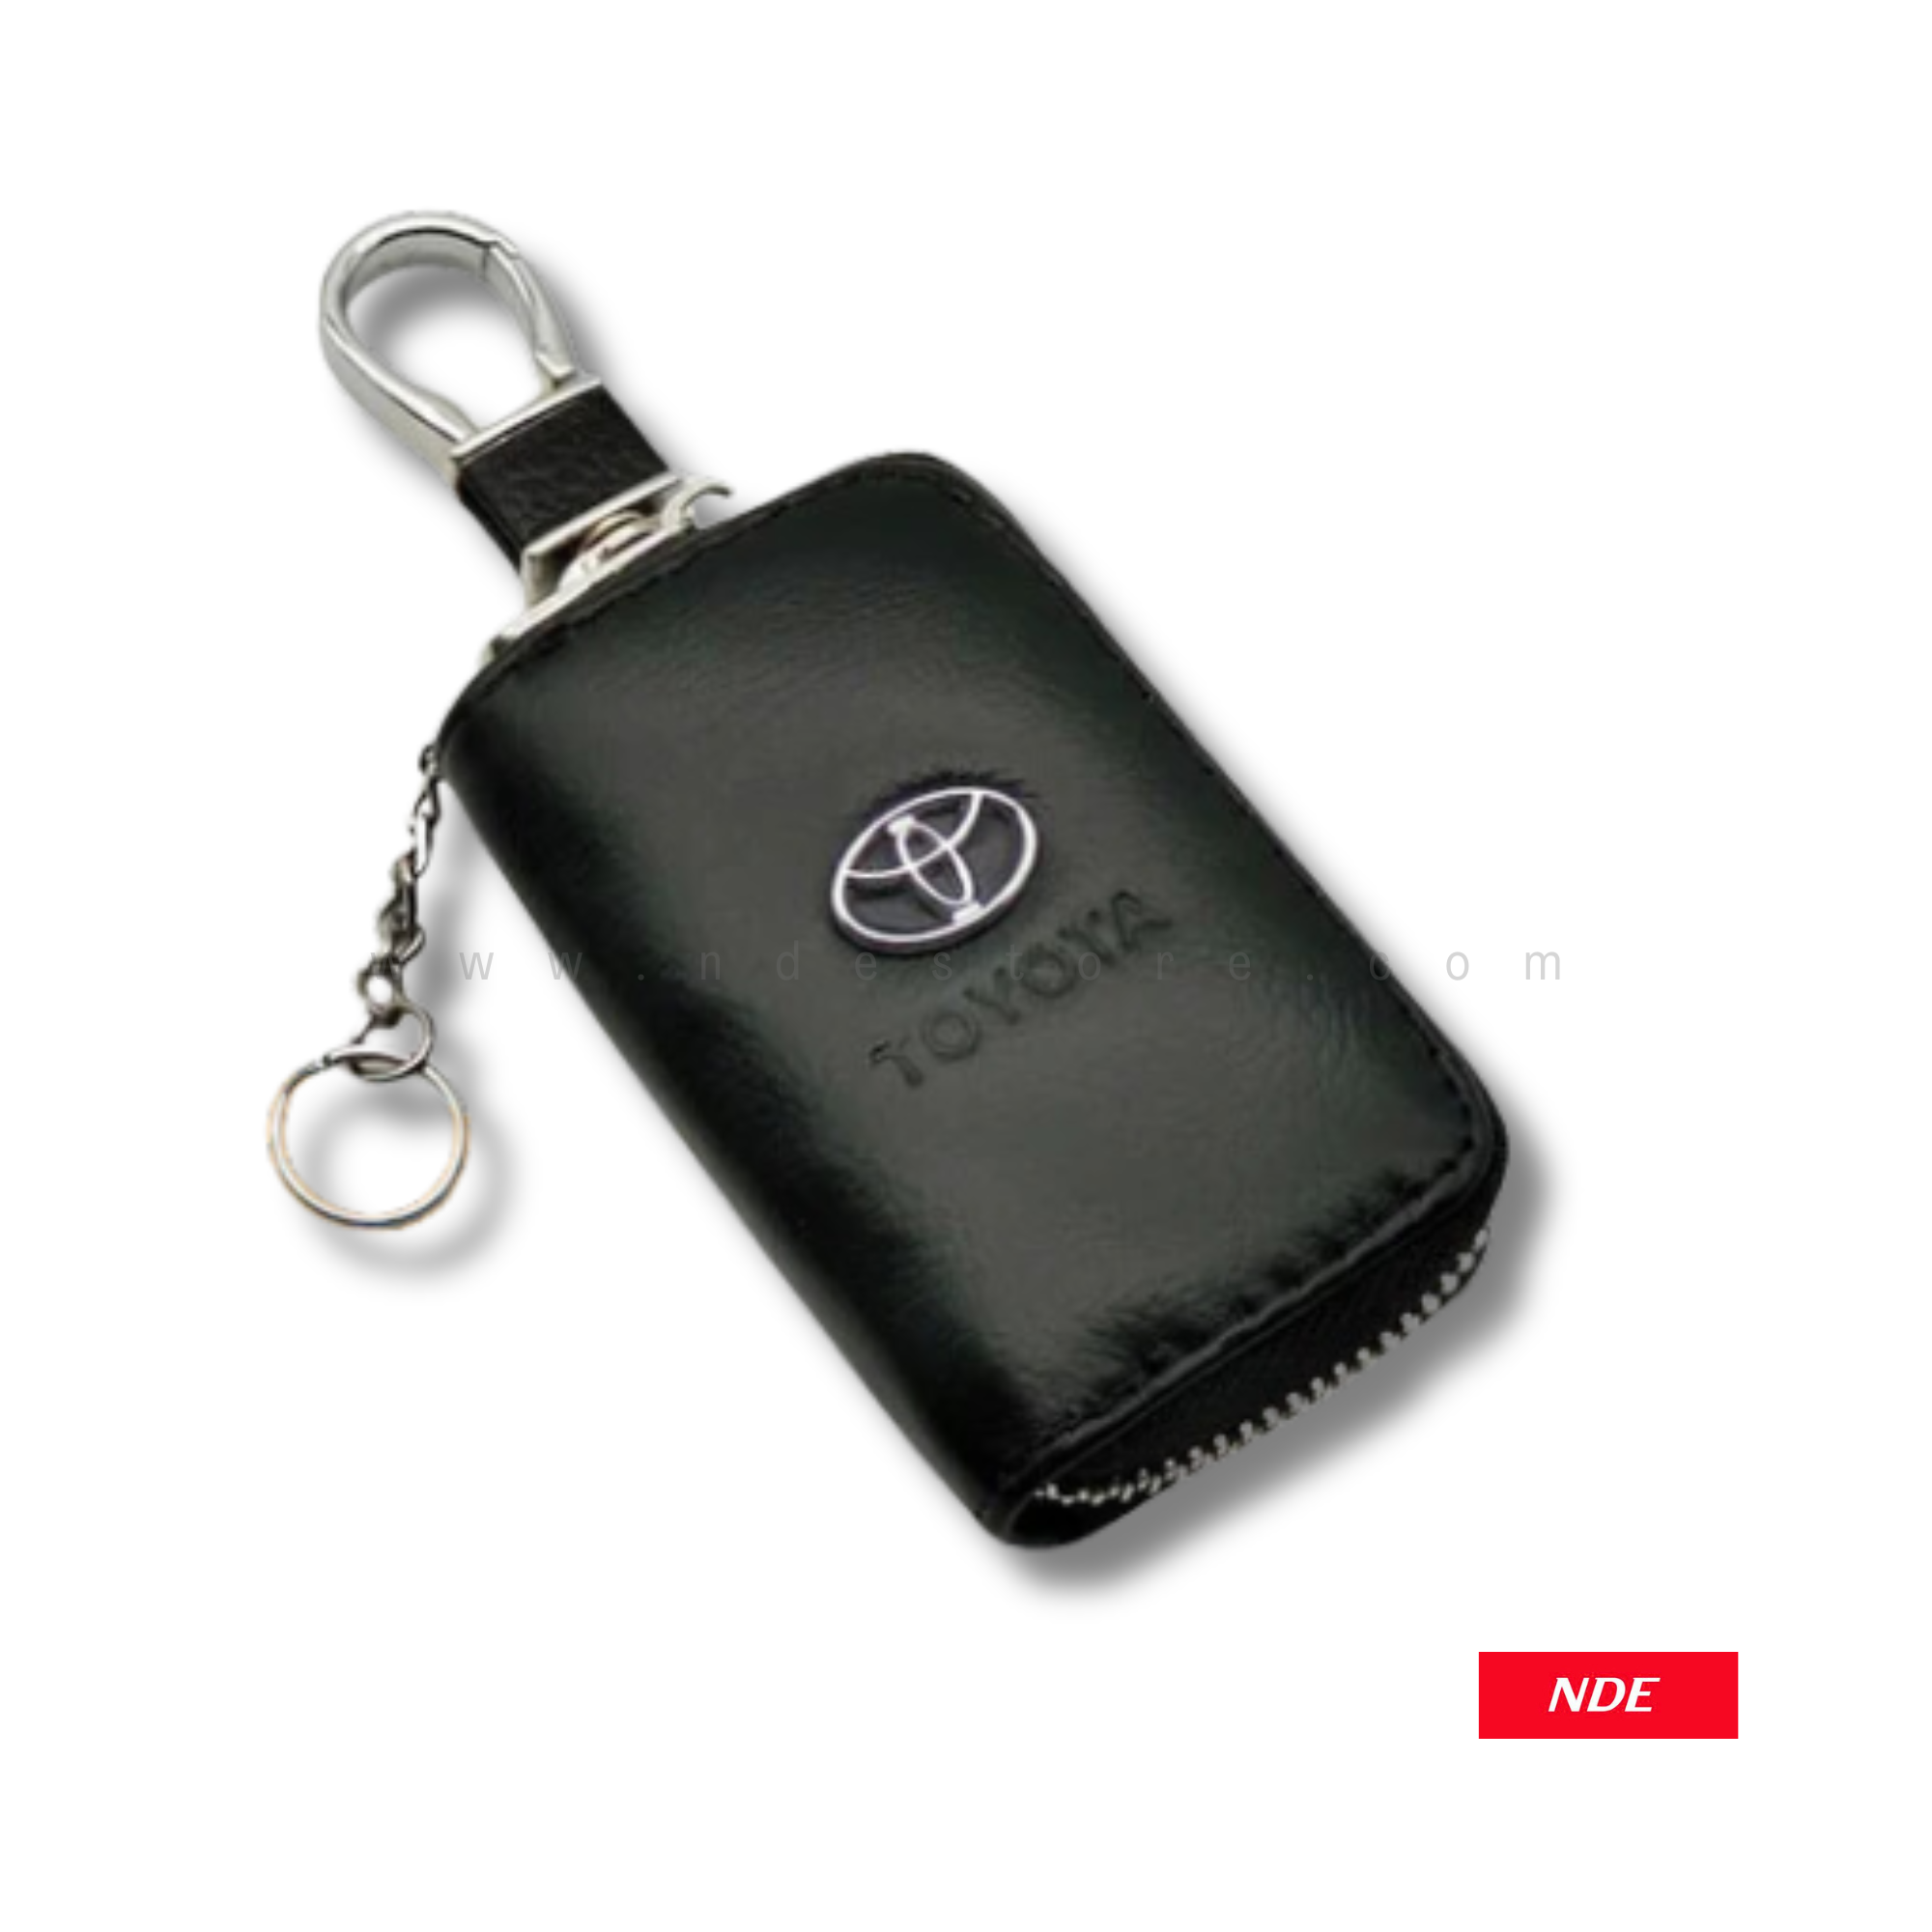 REMOTE COVER KEY POUCH PREMIUM LEATHER MATERIAL WITH TOYOTA LOGO (MADE IN CHINA)